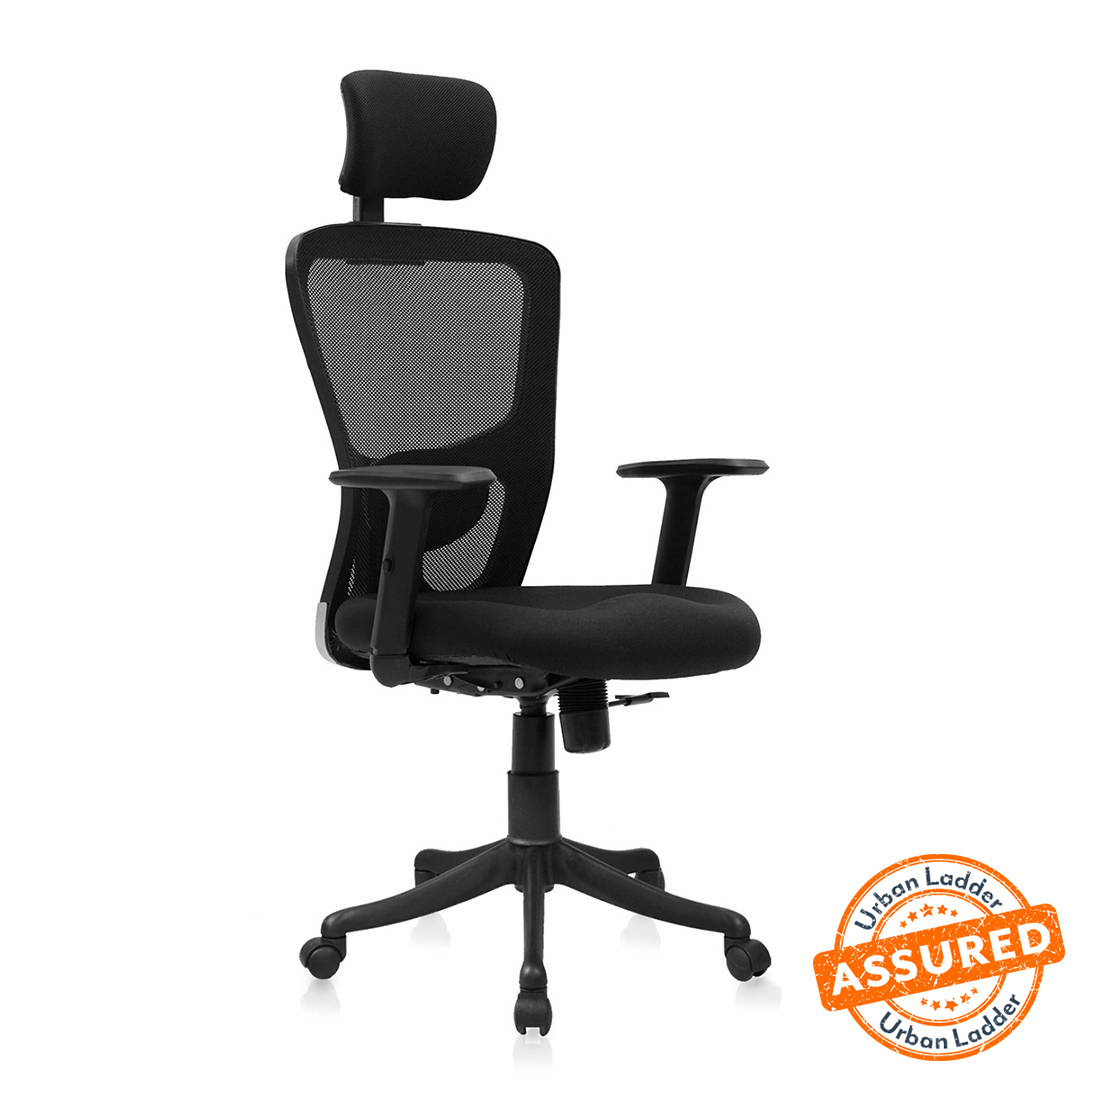 Buy Off, Shop Nowice Chairs Online and Get up to 50% Off